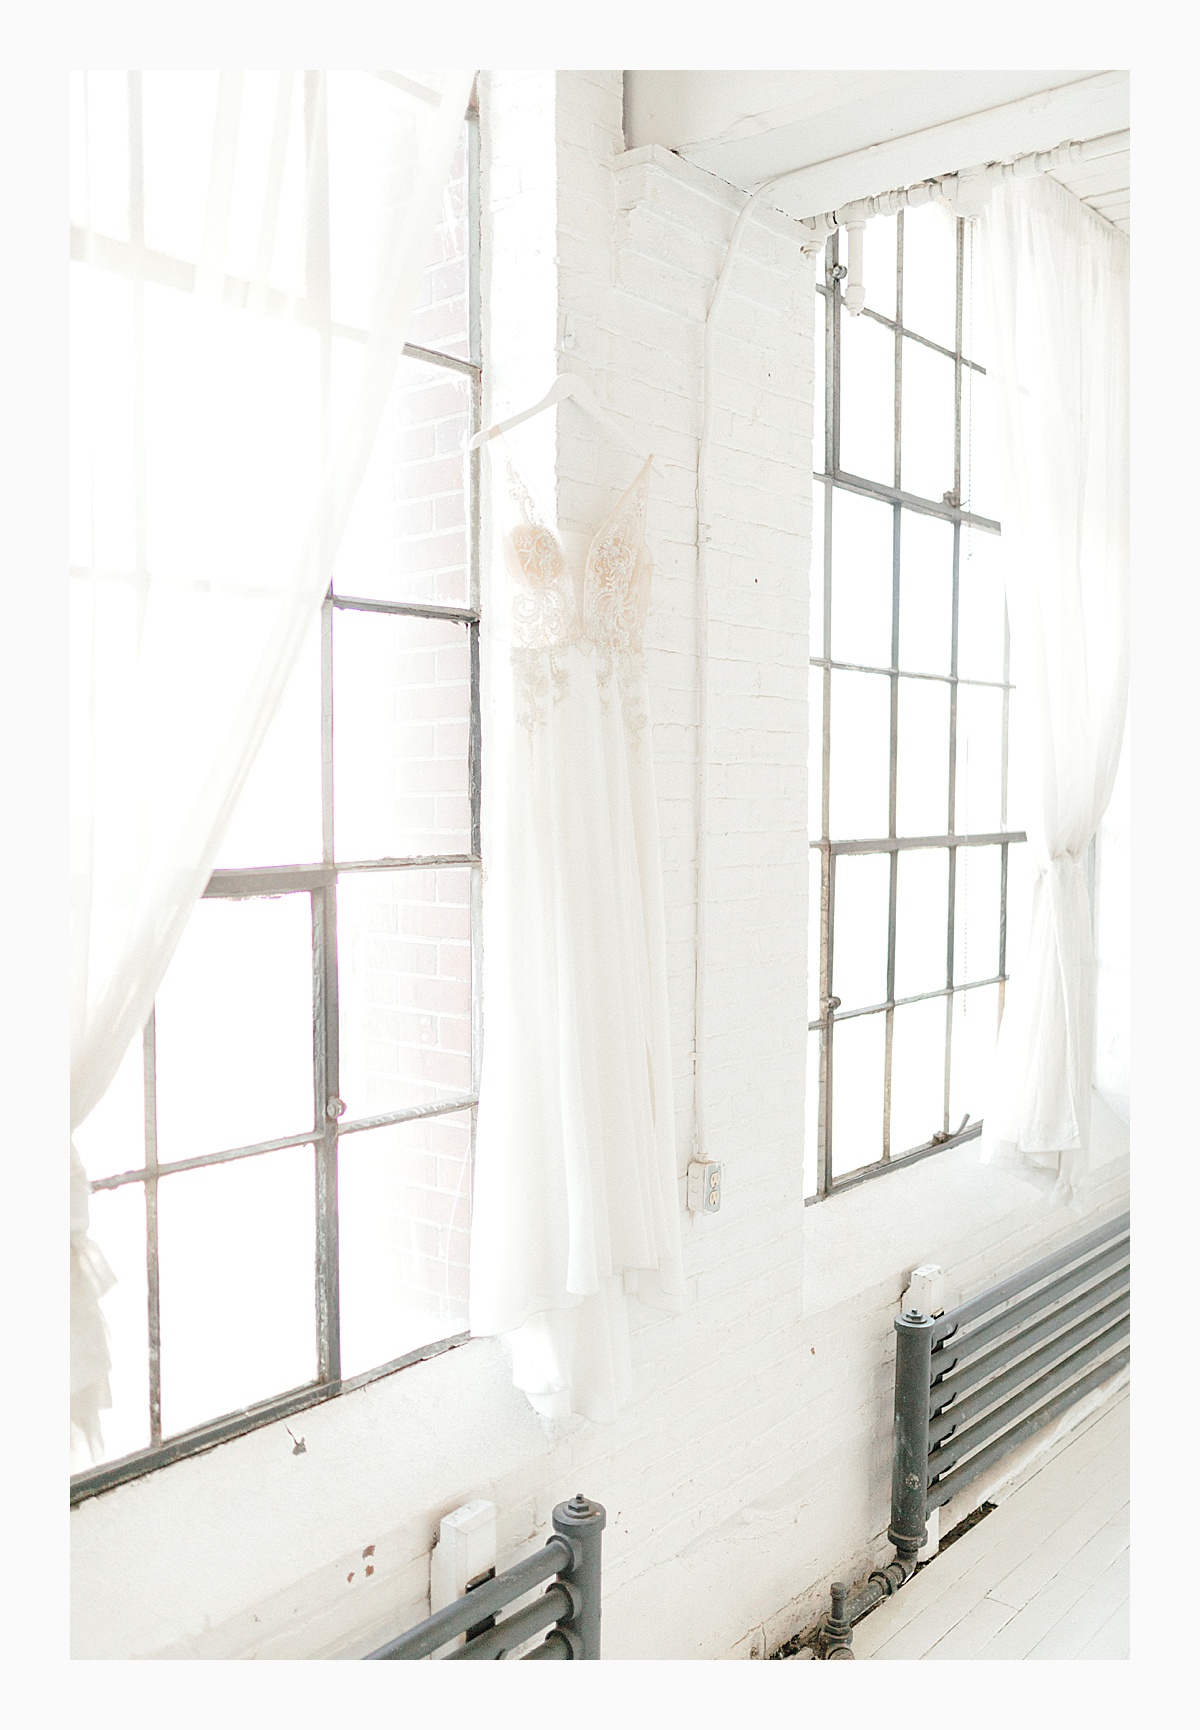 The Bemis Building in downtown Seattle is one of my favorite places to use for photo shoots!  This styled bridal shoot with touches of peach and white was dreamy.  #emmarosecompany #kindredpresets #seattlebride_0009.jpg